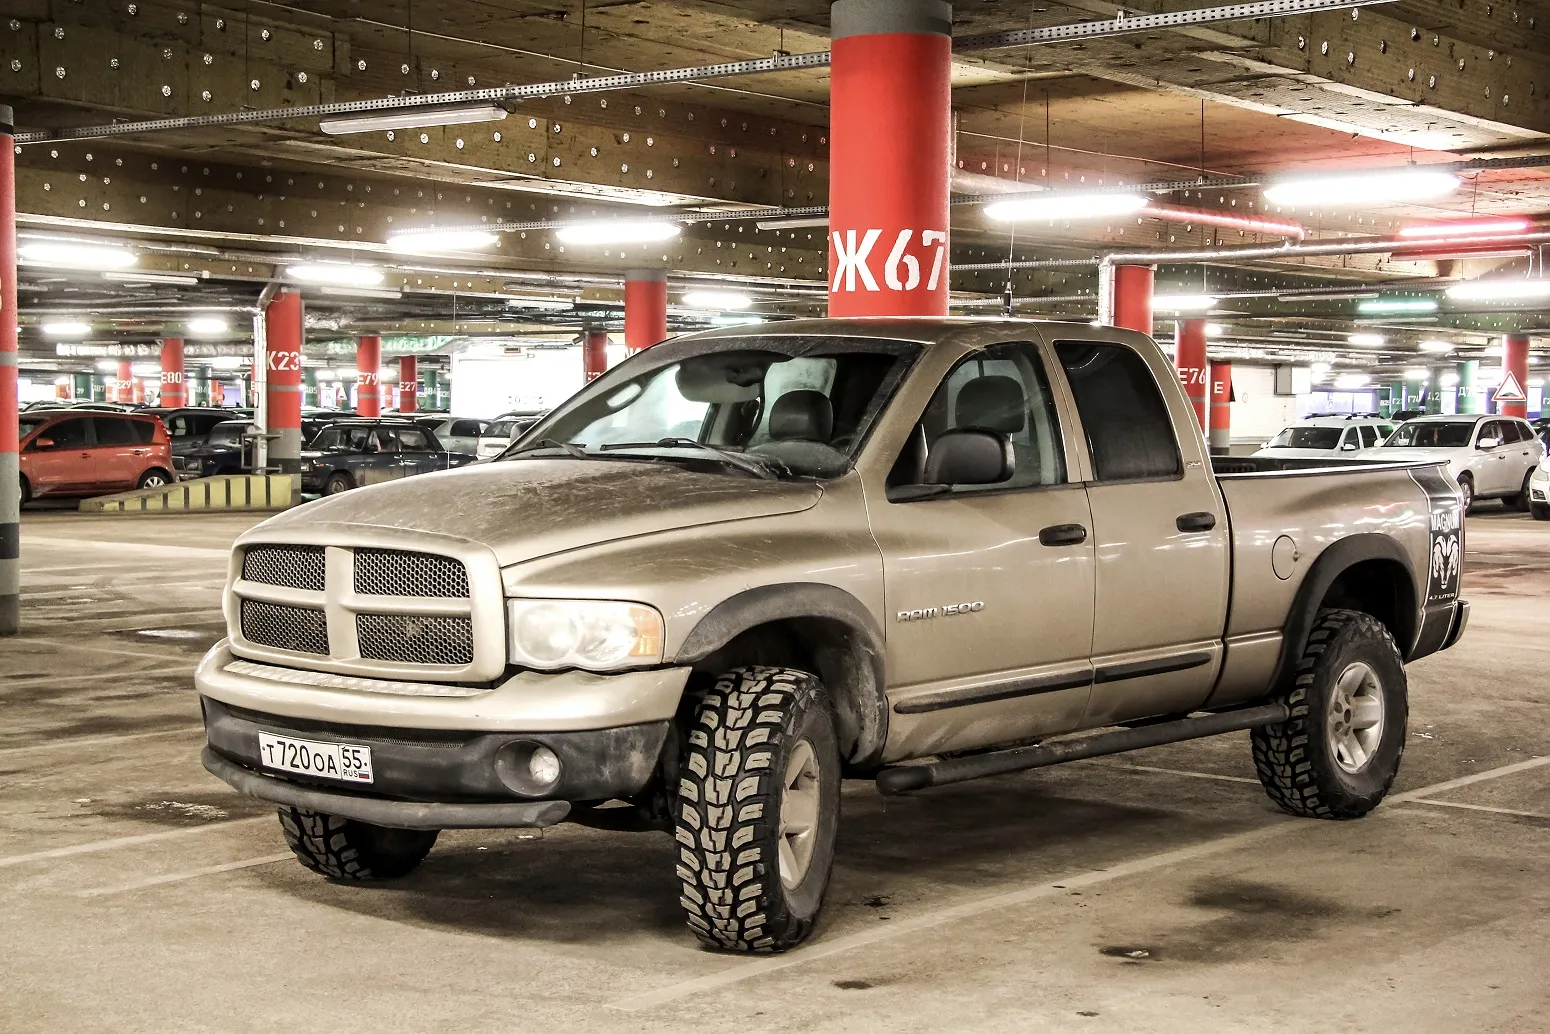 See What They’ve Done to the New Dodge RAM